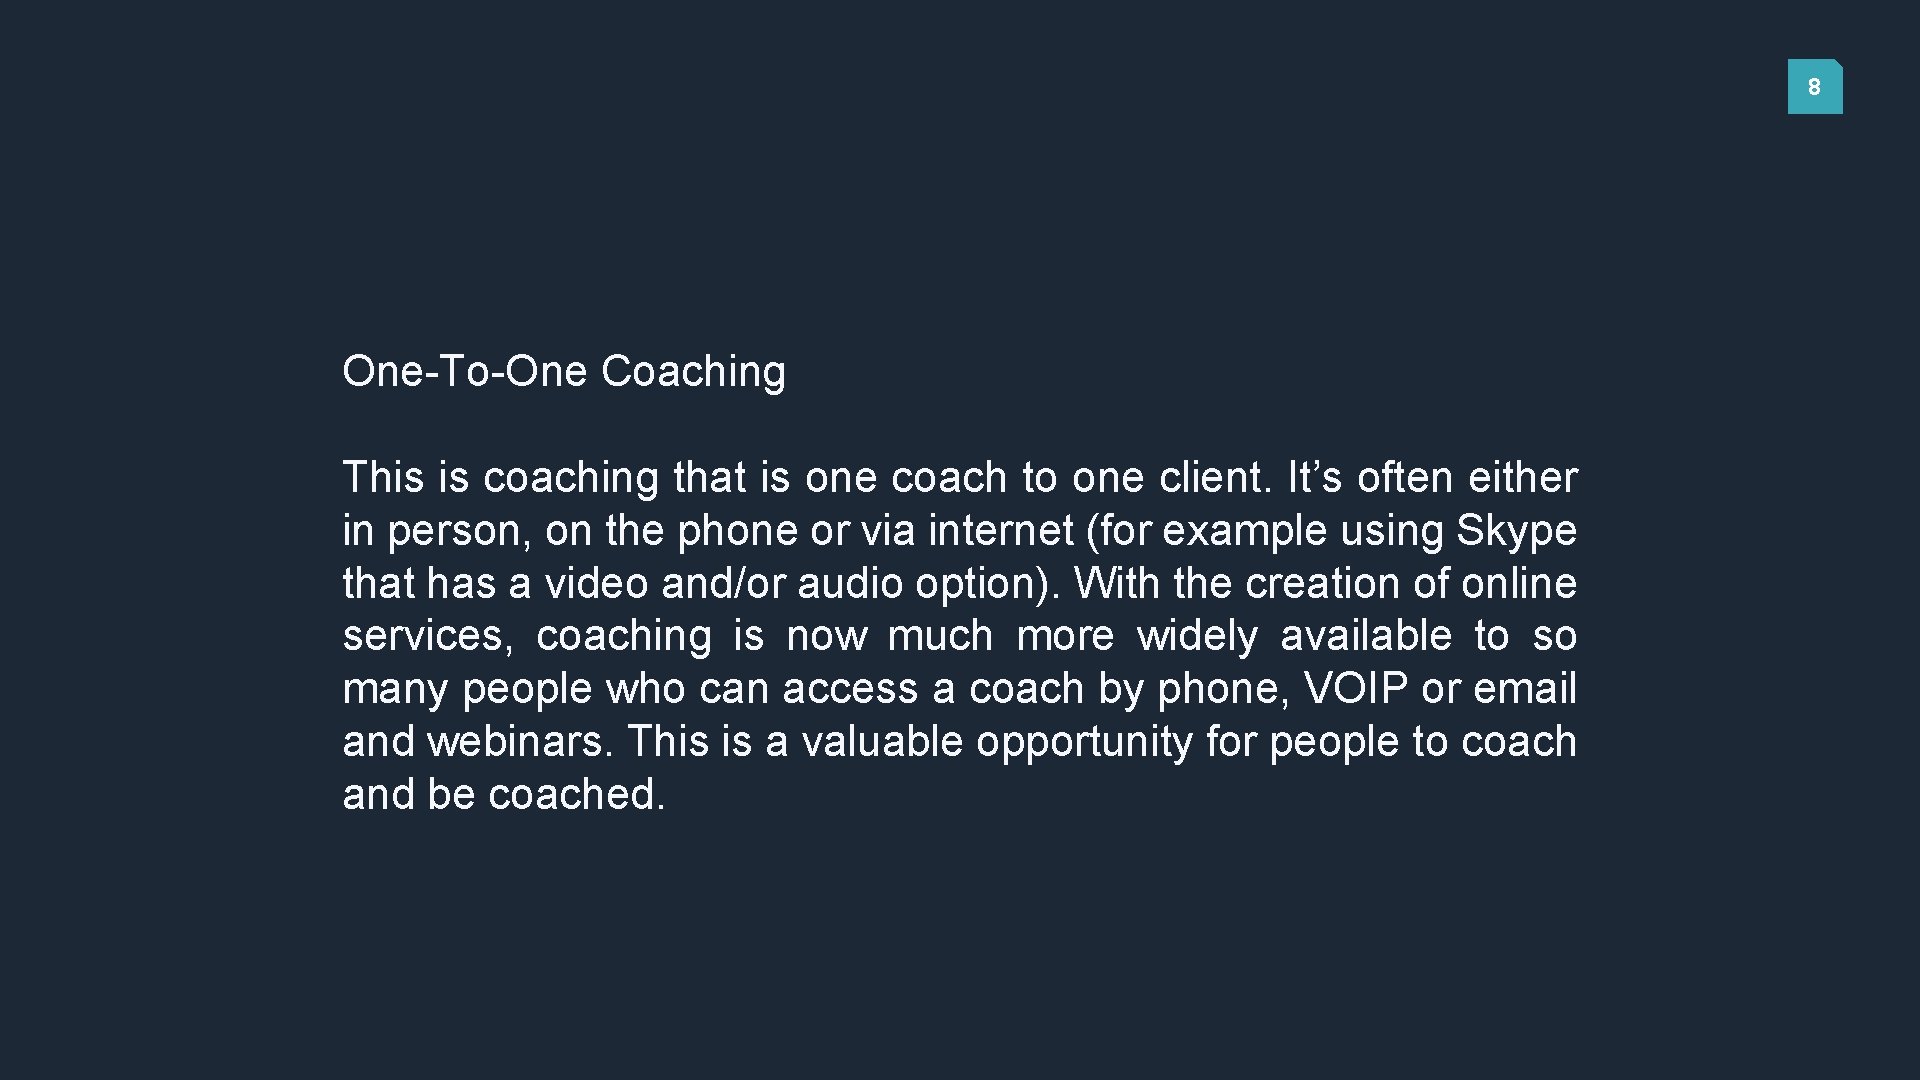 8 One-To-One Coaching This is coaching that is one coach to one client. It’s